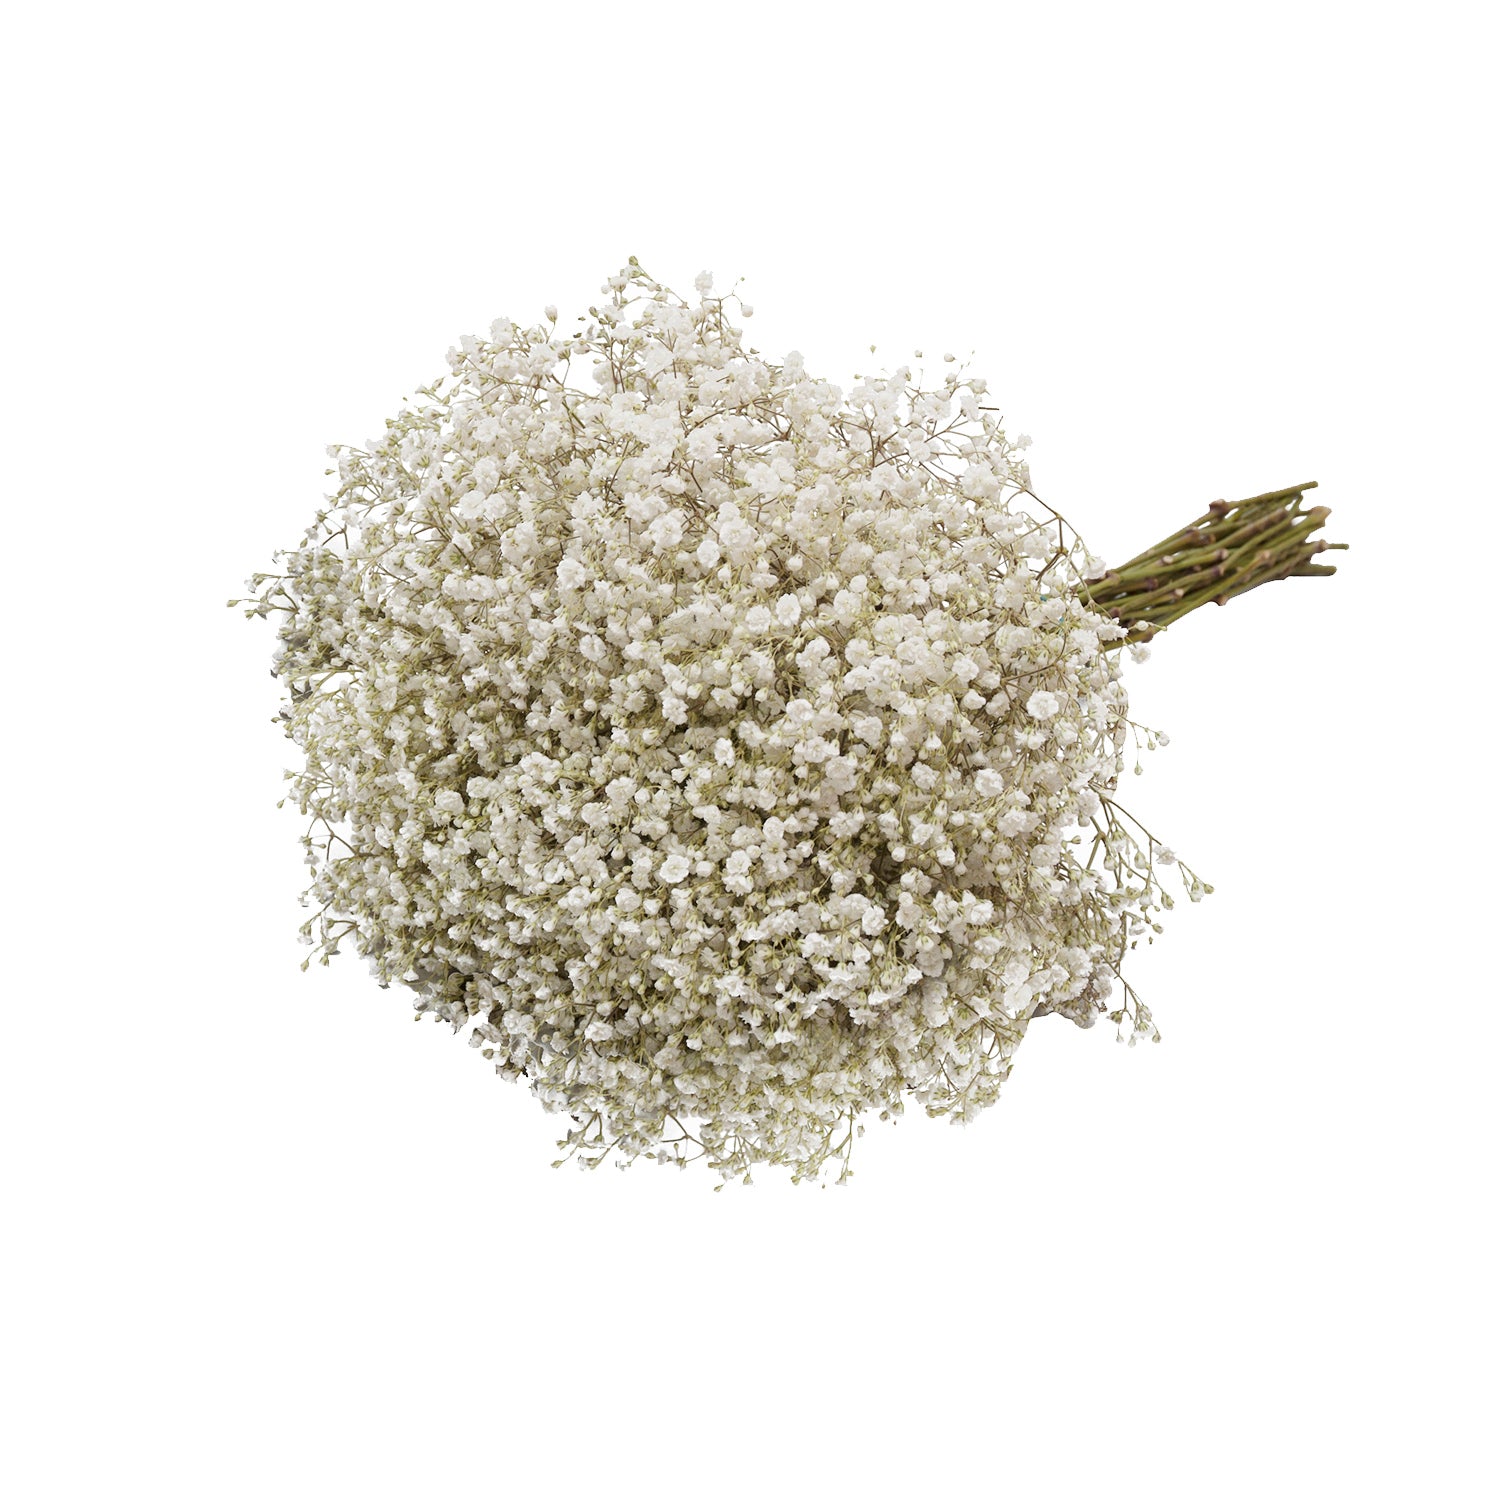 Wholesale Baby's Breath - Million Star White / 8 Bunches